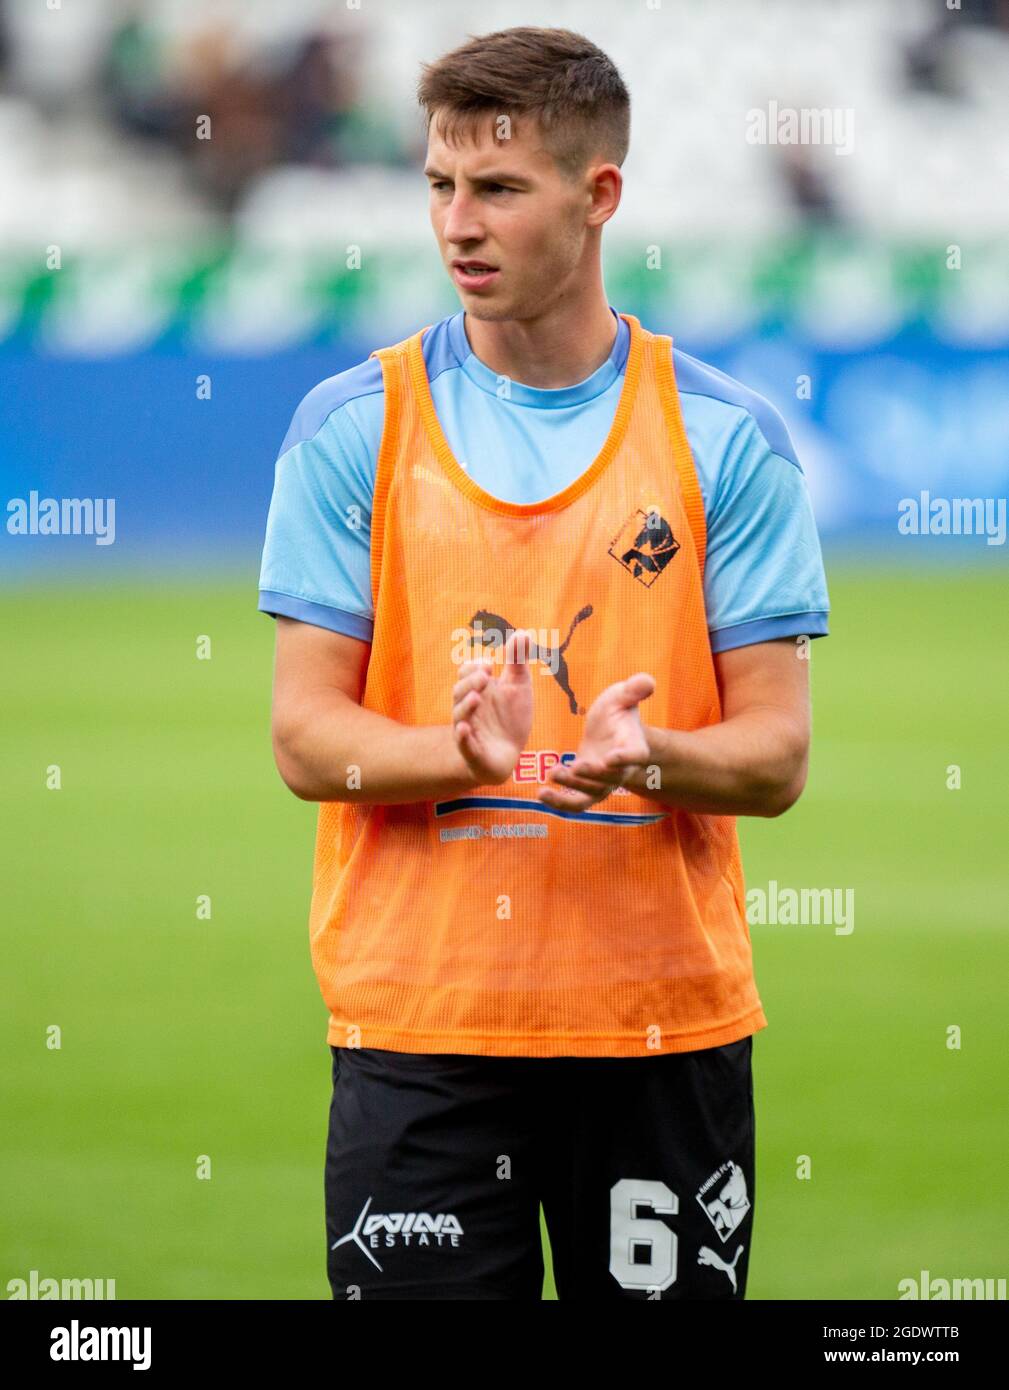 Viborg, Denmark. 13th, August 2021. Lasse Berg Johnsen (6) of Randers FC  seen during the warm up before the 3F Superliga match between Viborg FF and  Randers FC at Energy Viborg Arena